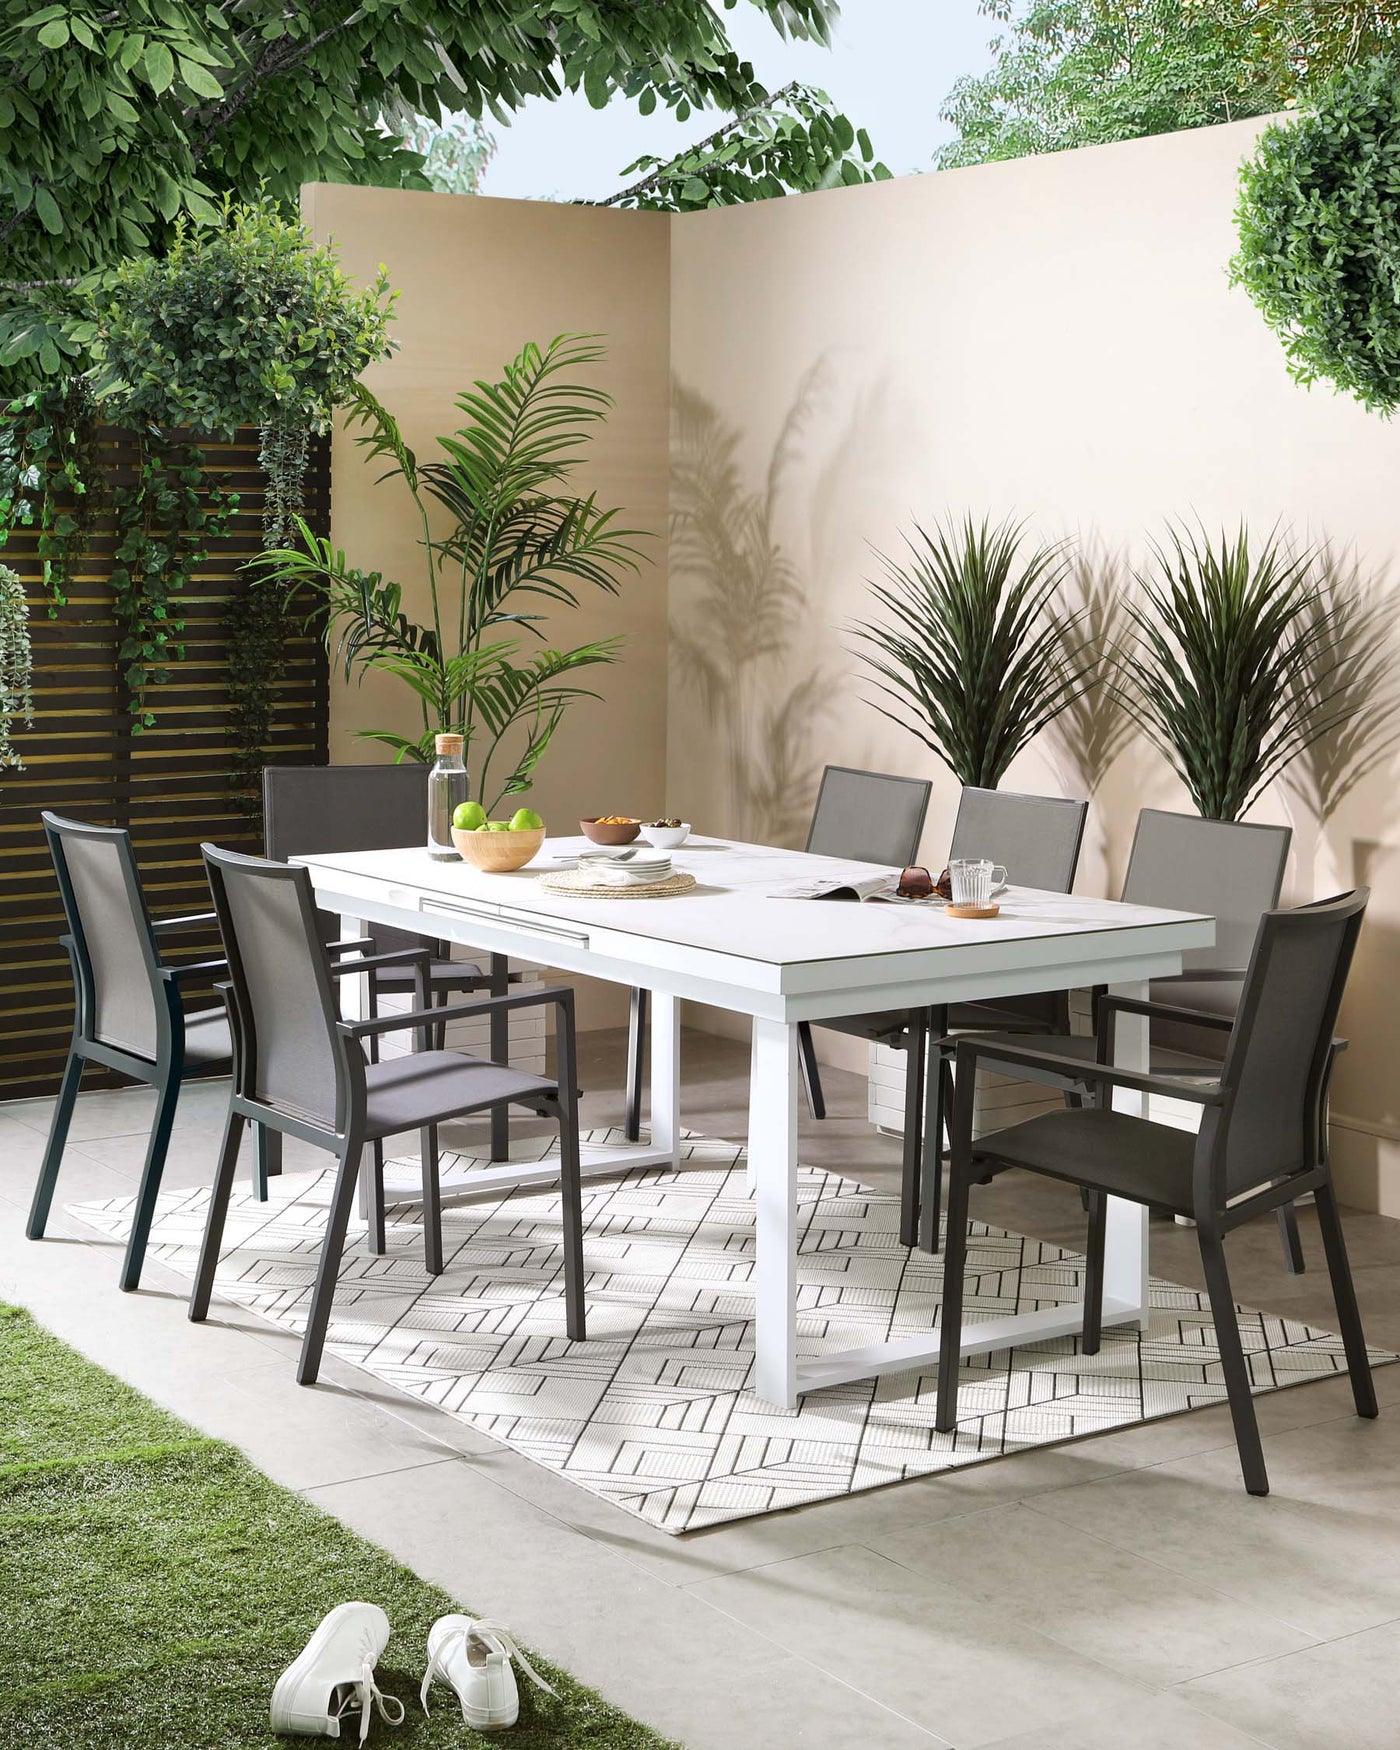 Modern outdoor dining set with a sleek white rectangular table and six charcoal grey chairs featuring clean lines and a minimalist design. The chairs have textile sling backrests and seats, providing both style and comfort for al fresco dining. The set is arranged on a geometric patterned area rug, complementing the contemporary aesthetic.